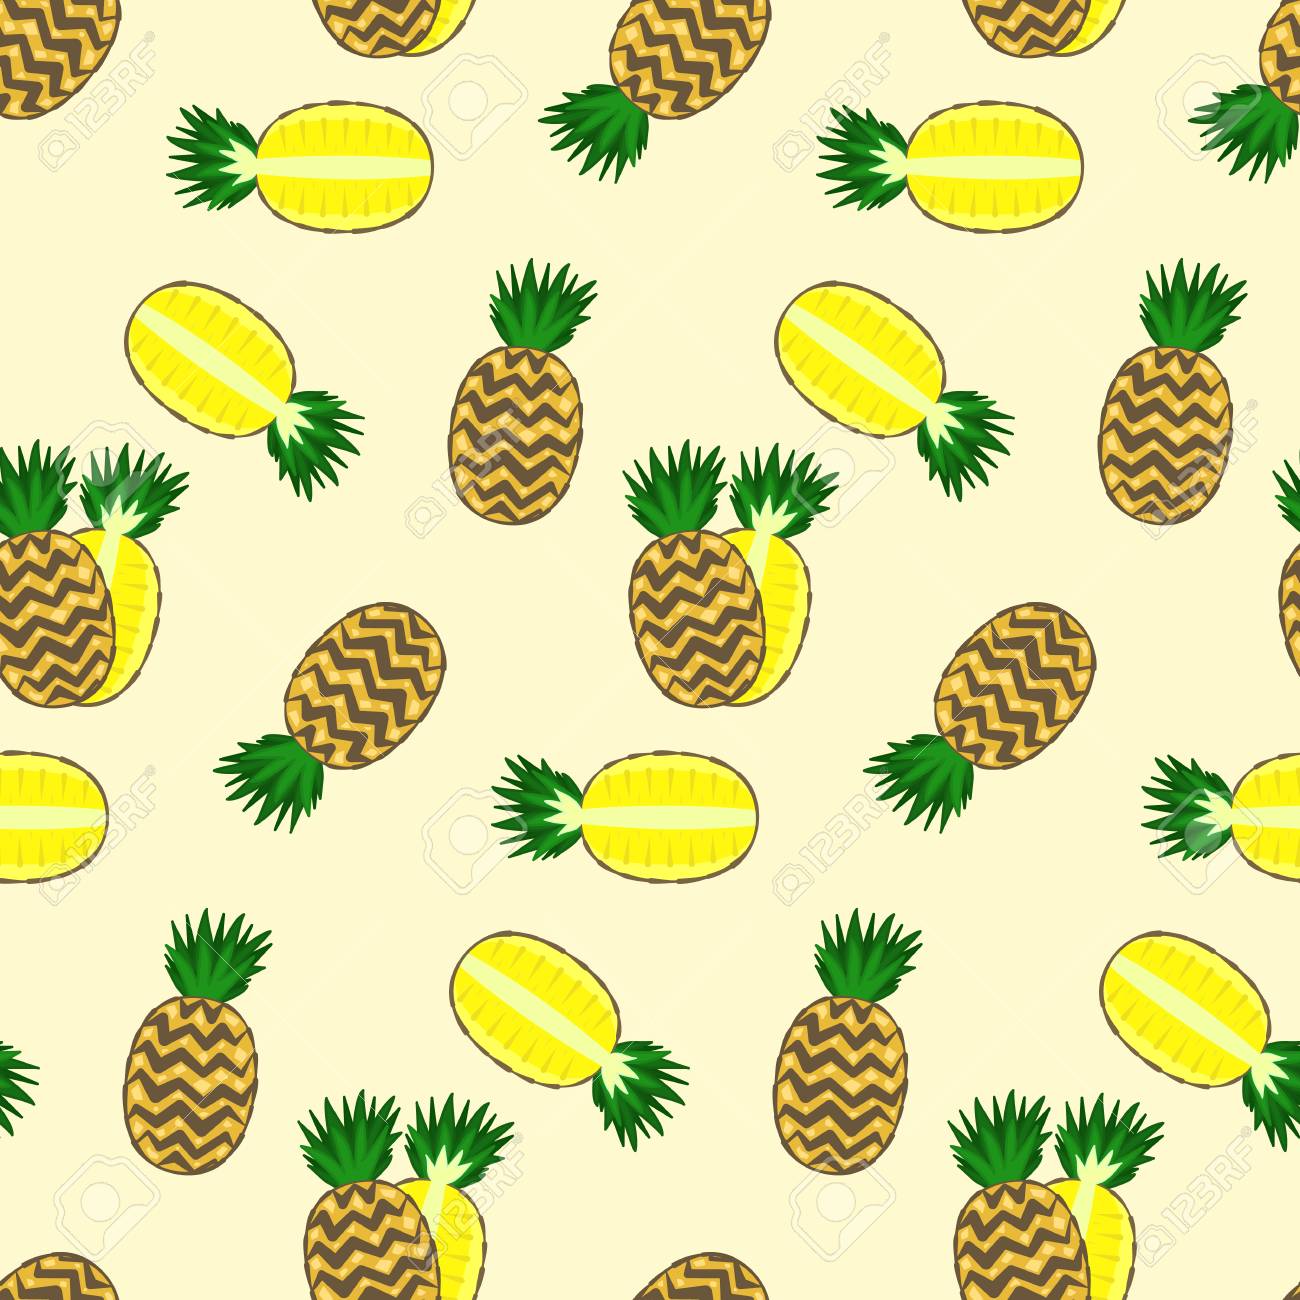 Bright Colorful Cartoon Full And Half Pineapple Seamless Pattern